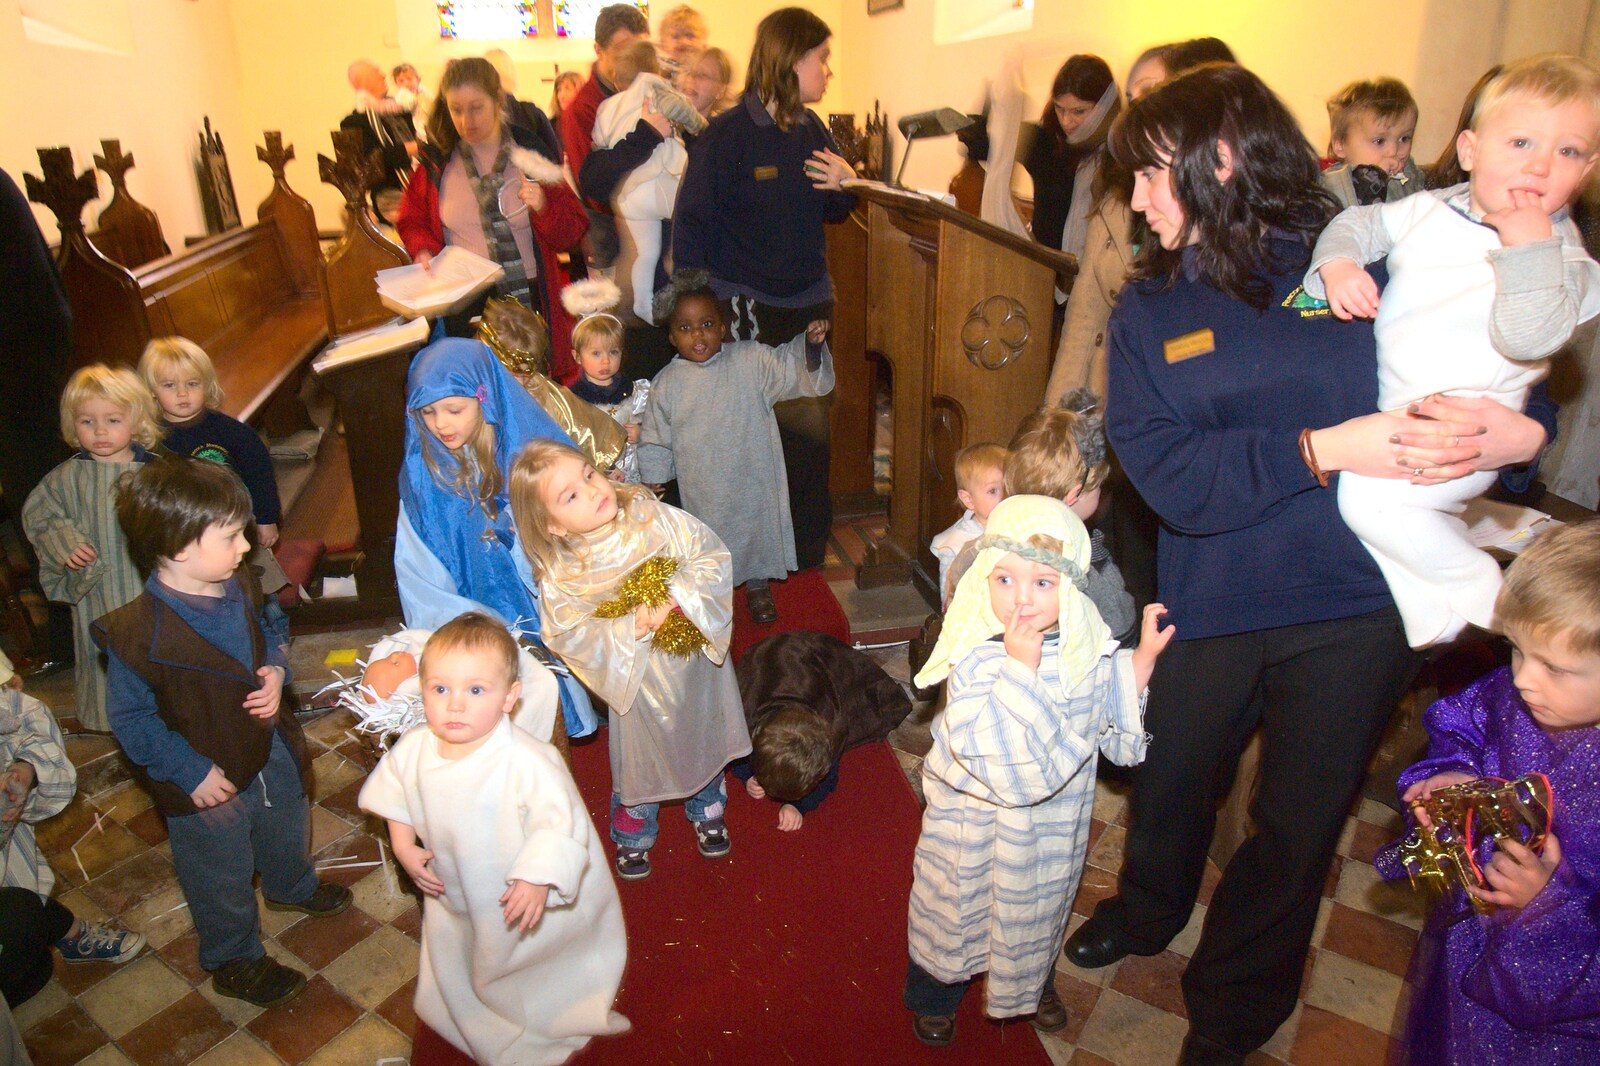 Fred hangs on to Jemma from Fred's First Nativity, St. Peter's Church, Palgrave, Suffolk - 8th December 2011